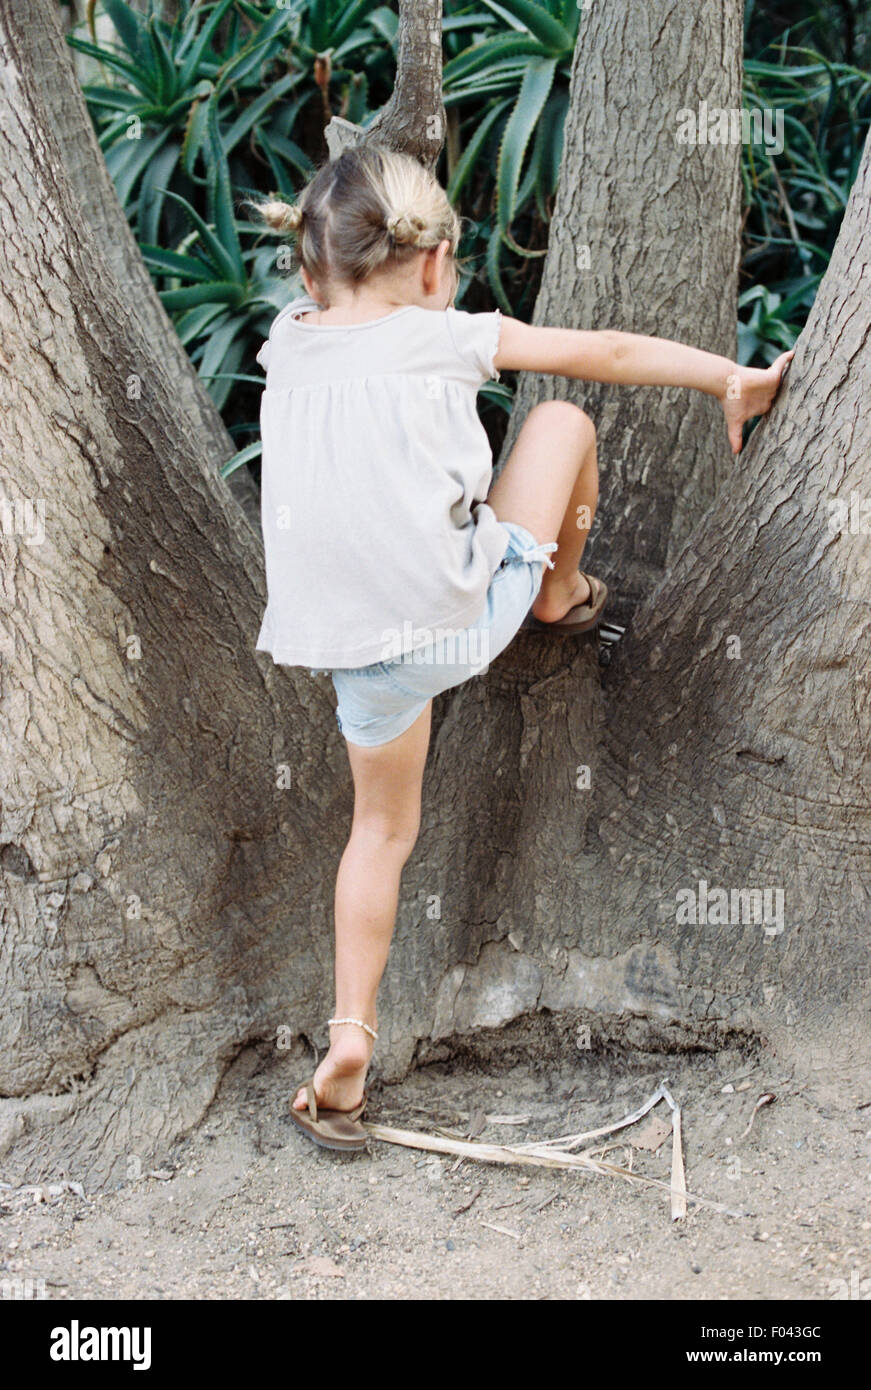 A young blond haired girl climbing a tree. Stock Photo